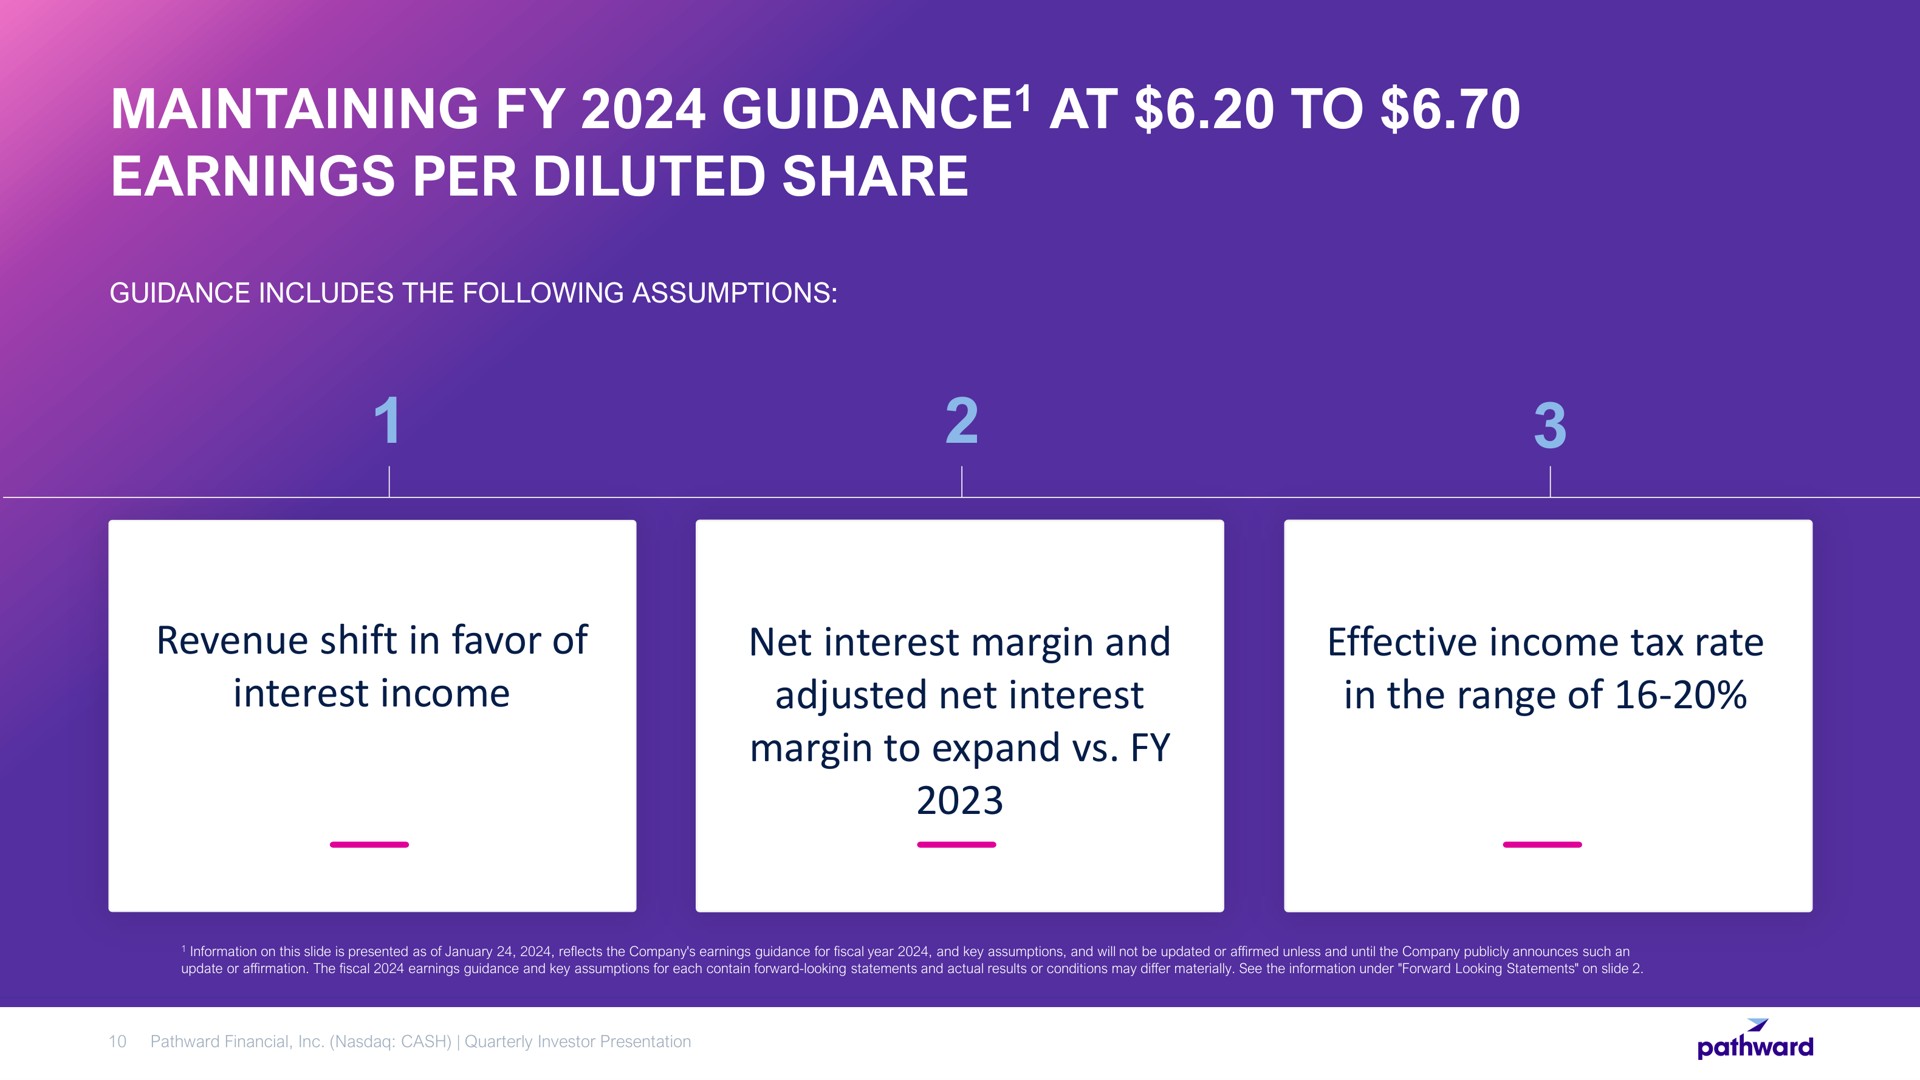 maintaining guidance at to earnings per diluted share revenue shift in favor of interest income net interest margin and adjusted net interest margin to expand effective income tax rate in the range of guidance | Pathward Financial